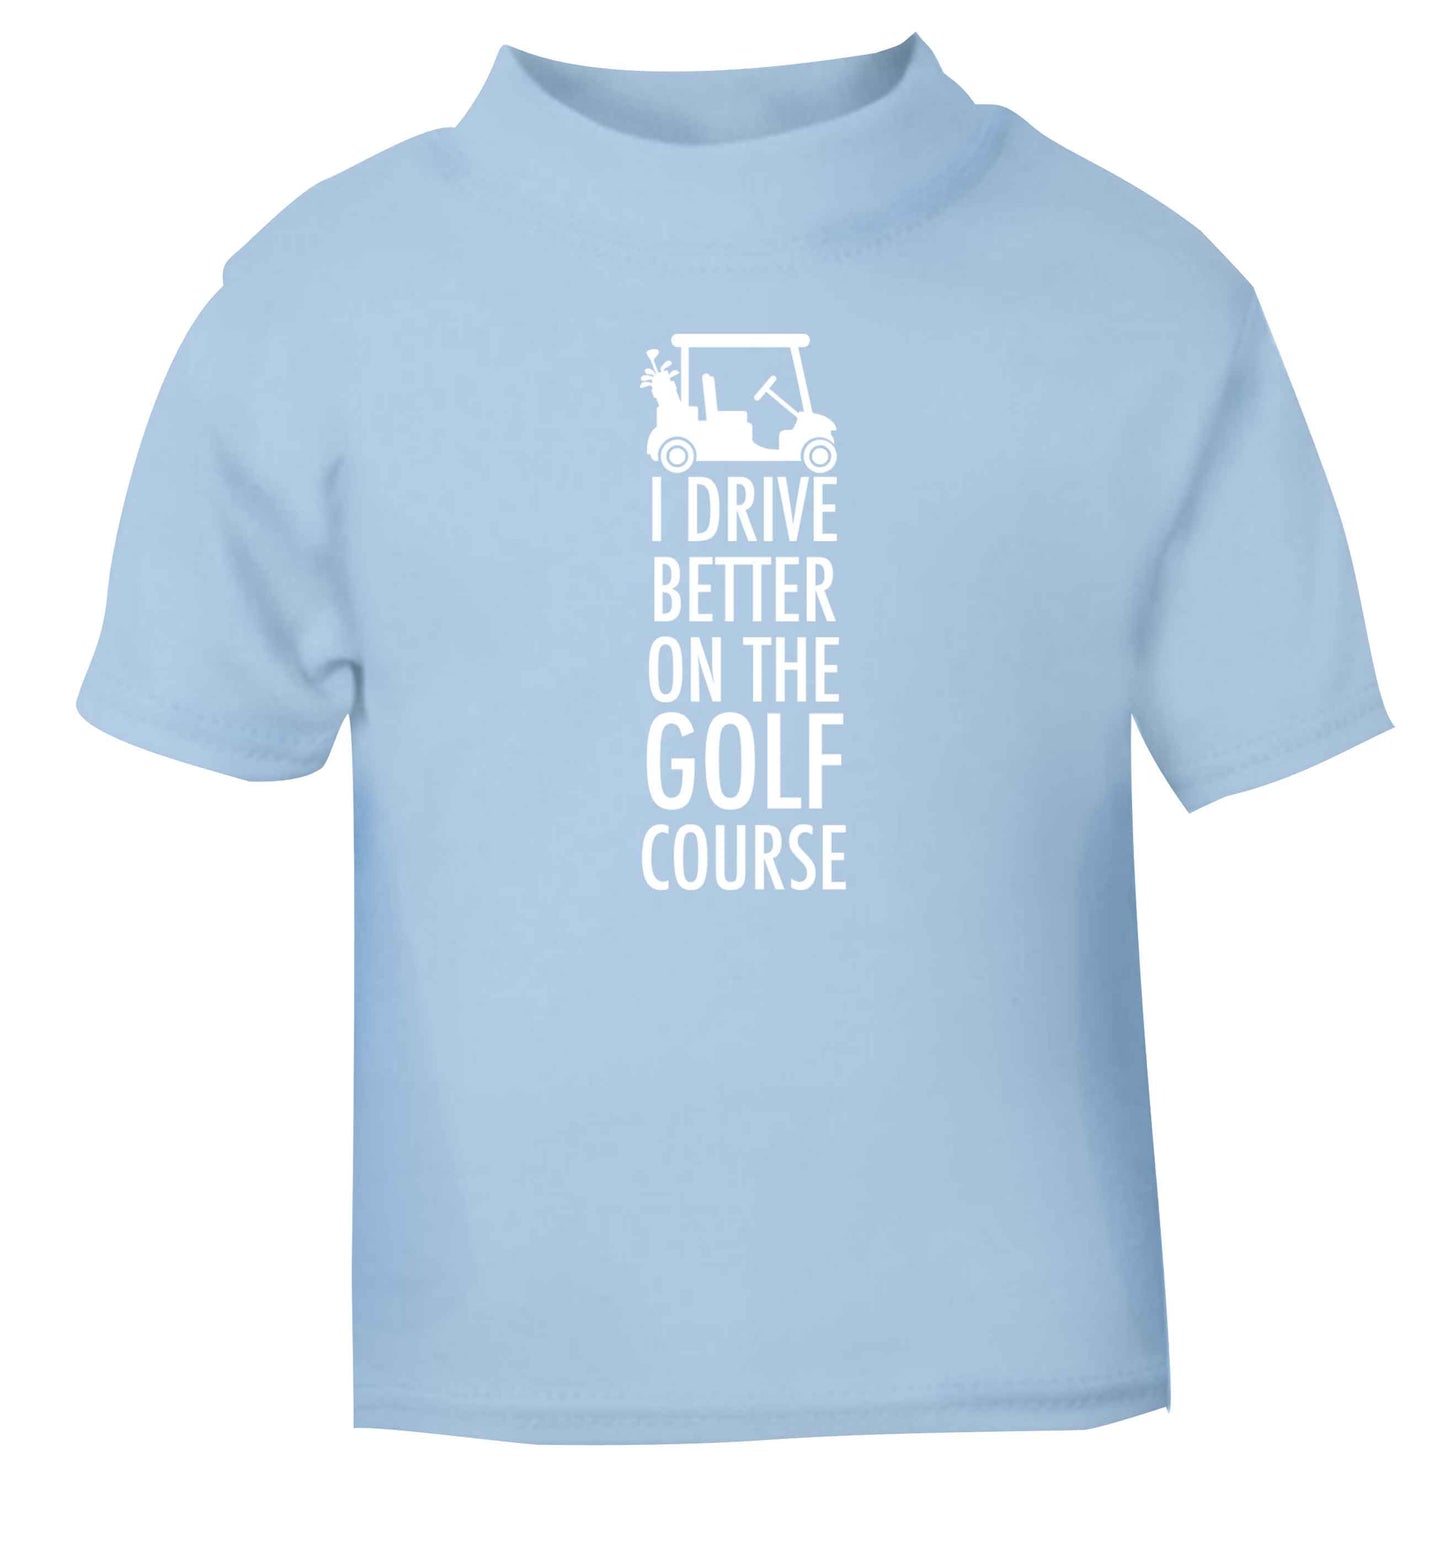 I drive better on the golf course light blue Baby Toddler Tshirt 2 Years